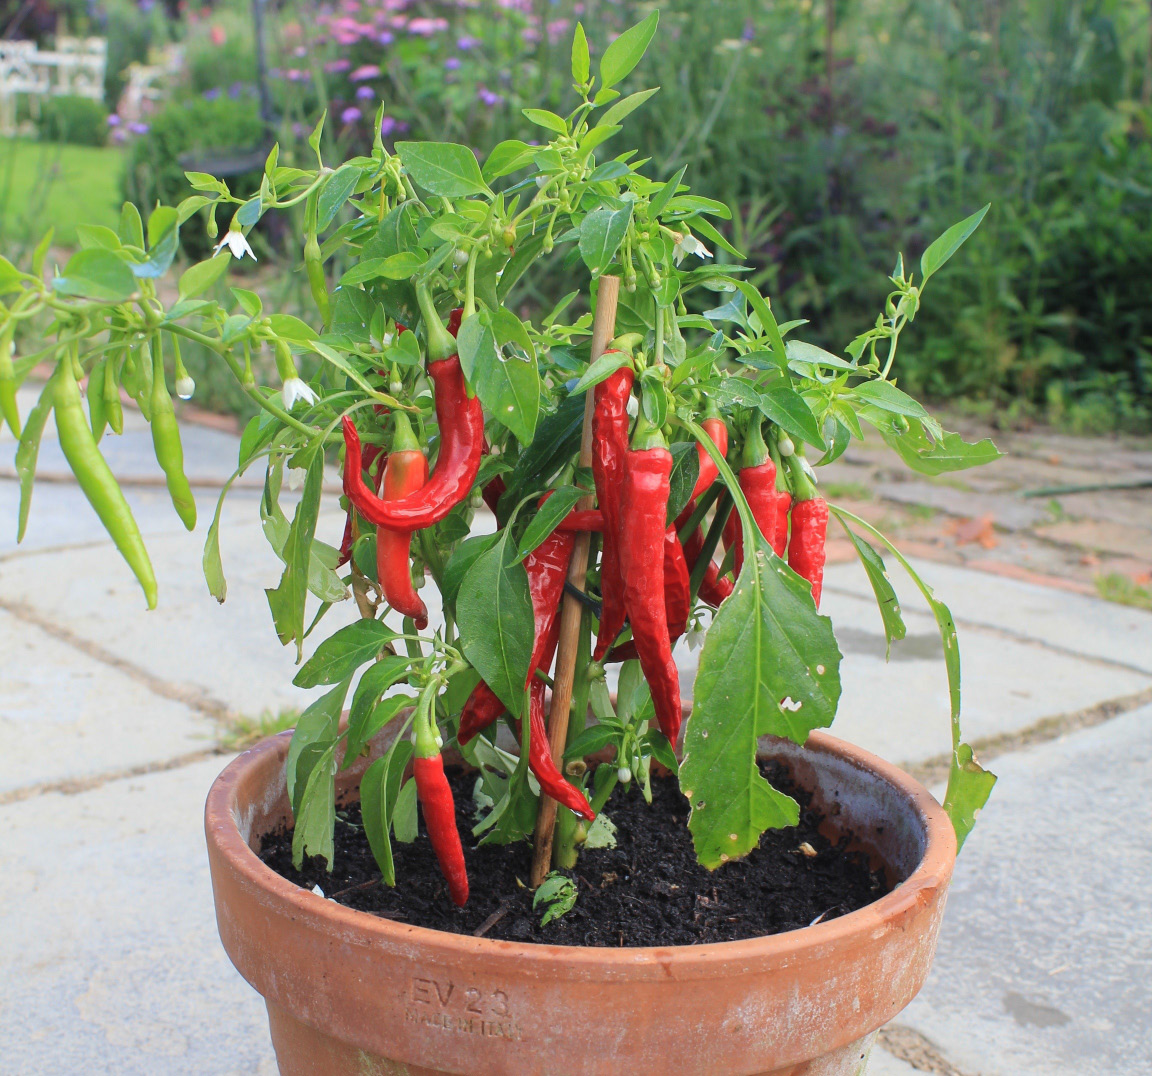 Grow your own chillies and herbs